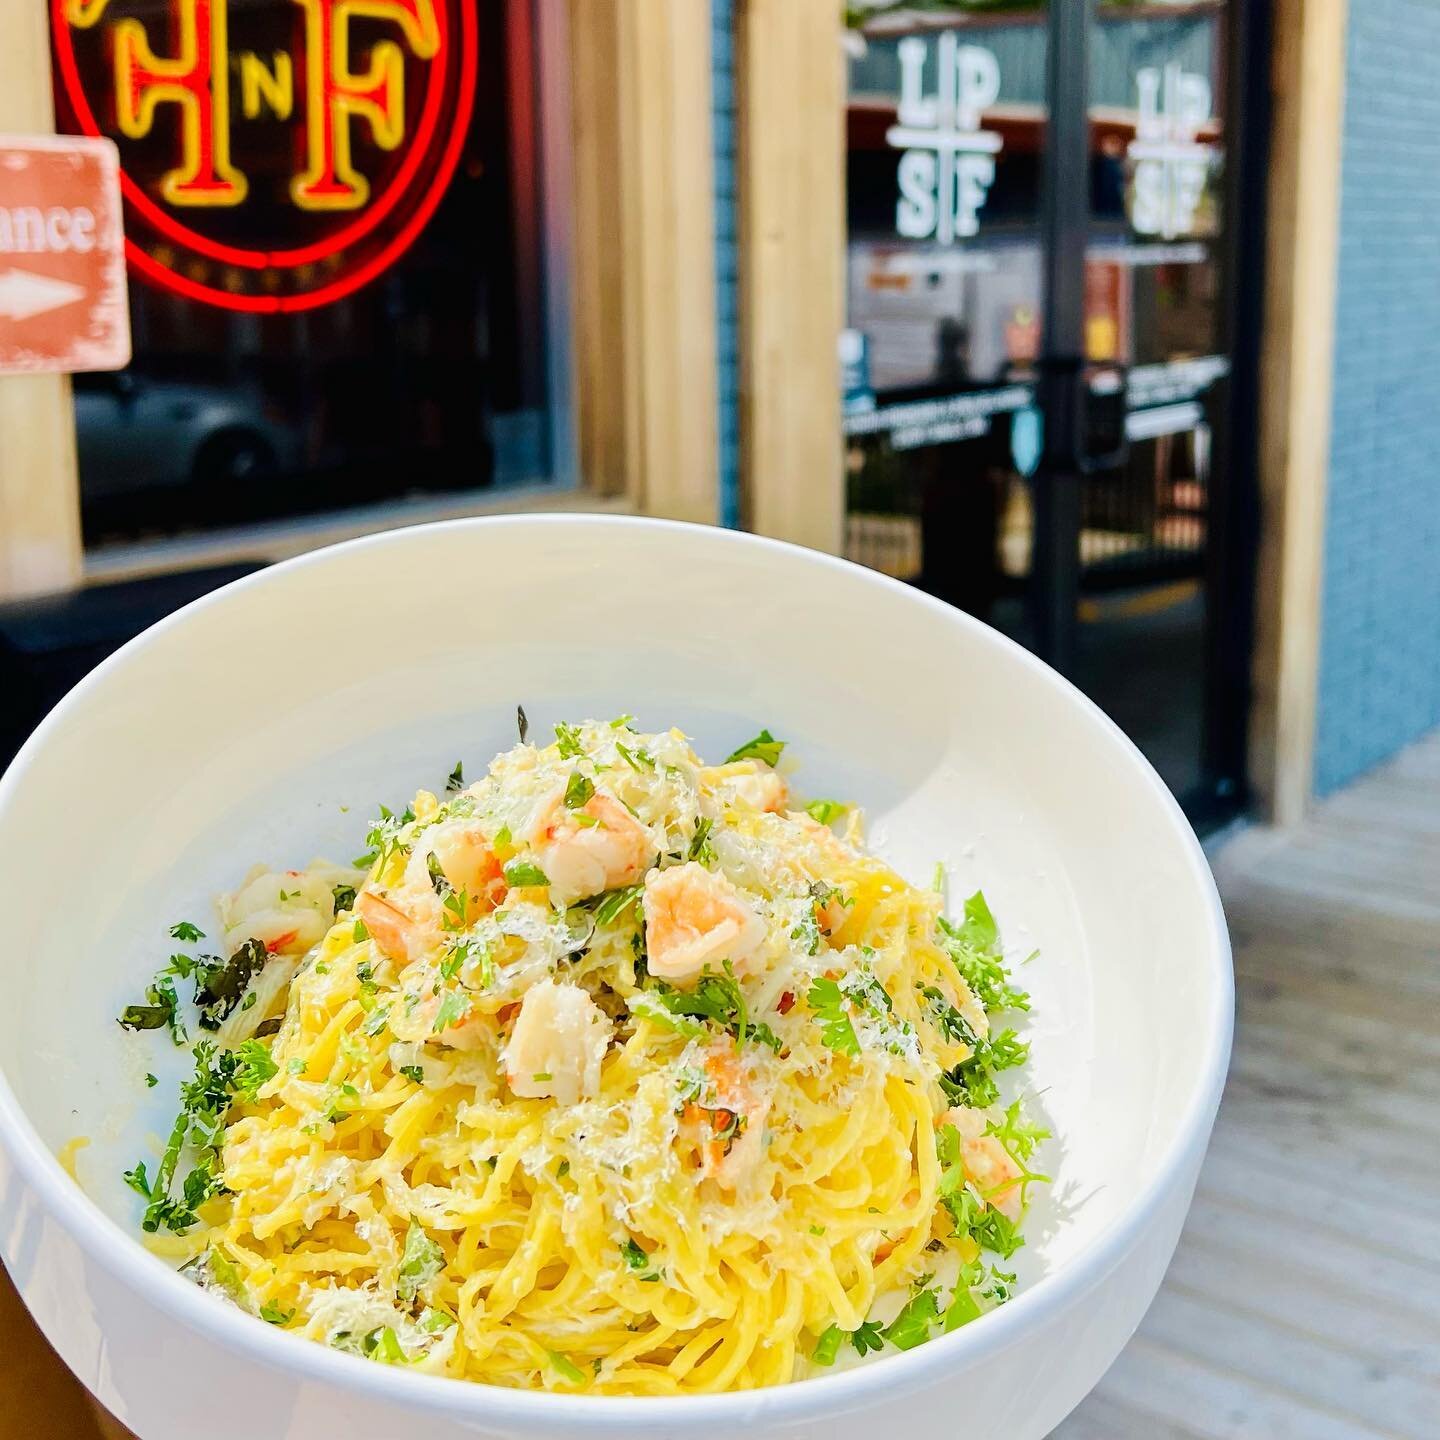 It&rsquo;s a double-feature for Moms kind of weekend 🥰🥂✨

We have TWO specials coming at you tonight 💕

Seafood Scampi 🍤 
Shrimp, Crab, Pasta, Butter, Garlic, Onion Parmesan, and Fresh Herbs 

S&rsquo;mores Skillet Cookie 
Bourbon Caramel Ice Cre